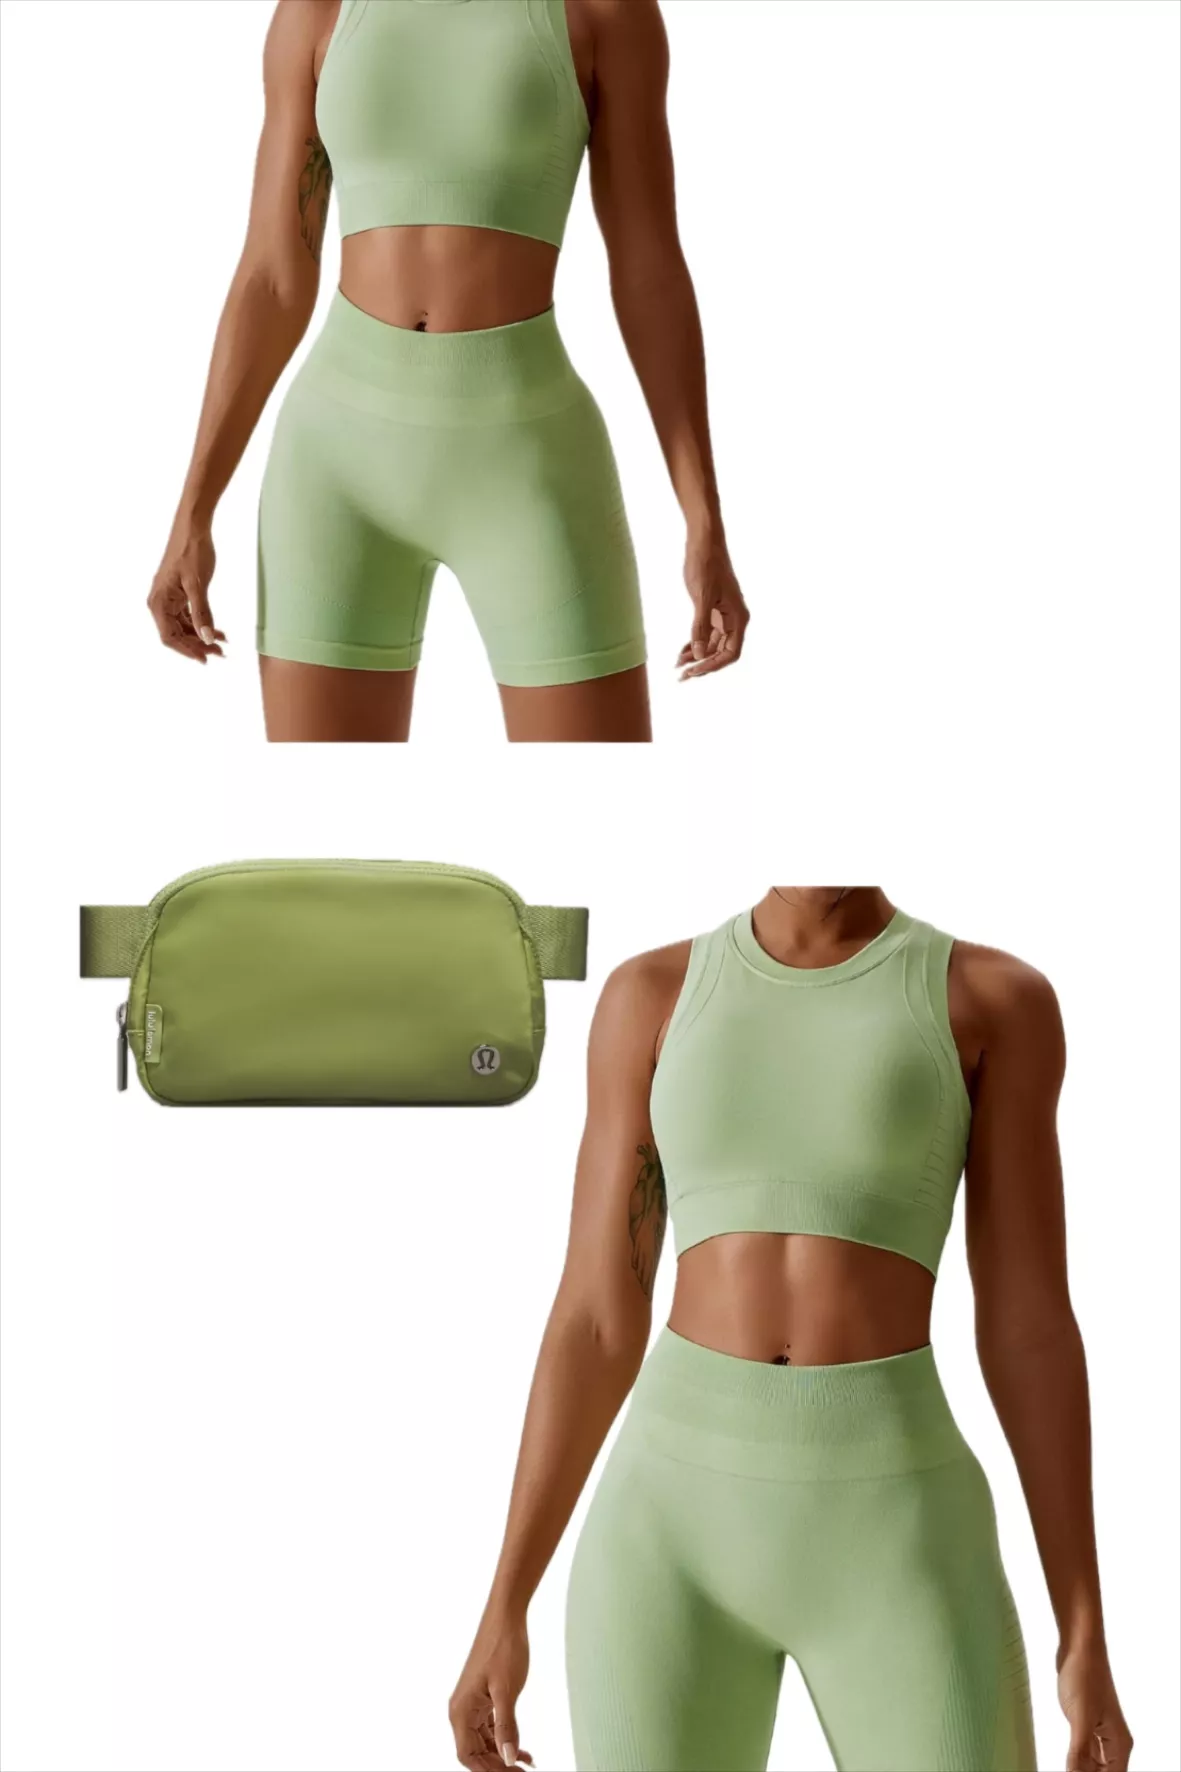  ABOCIW Workout Sets for Women 2 Piece Seamless Ribbed